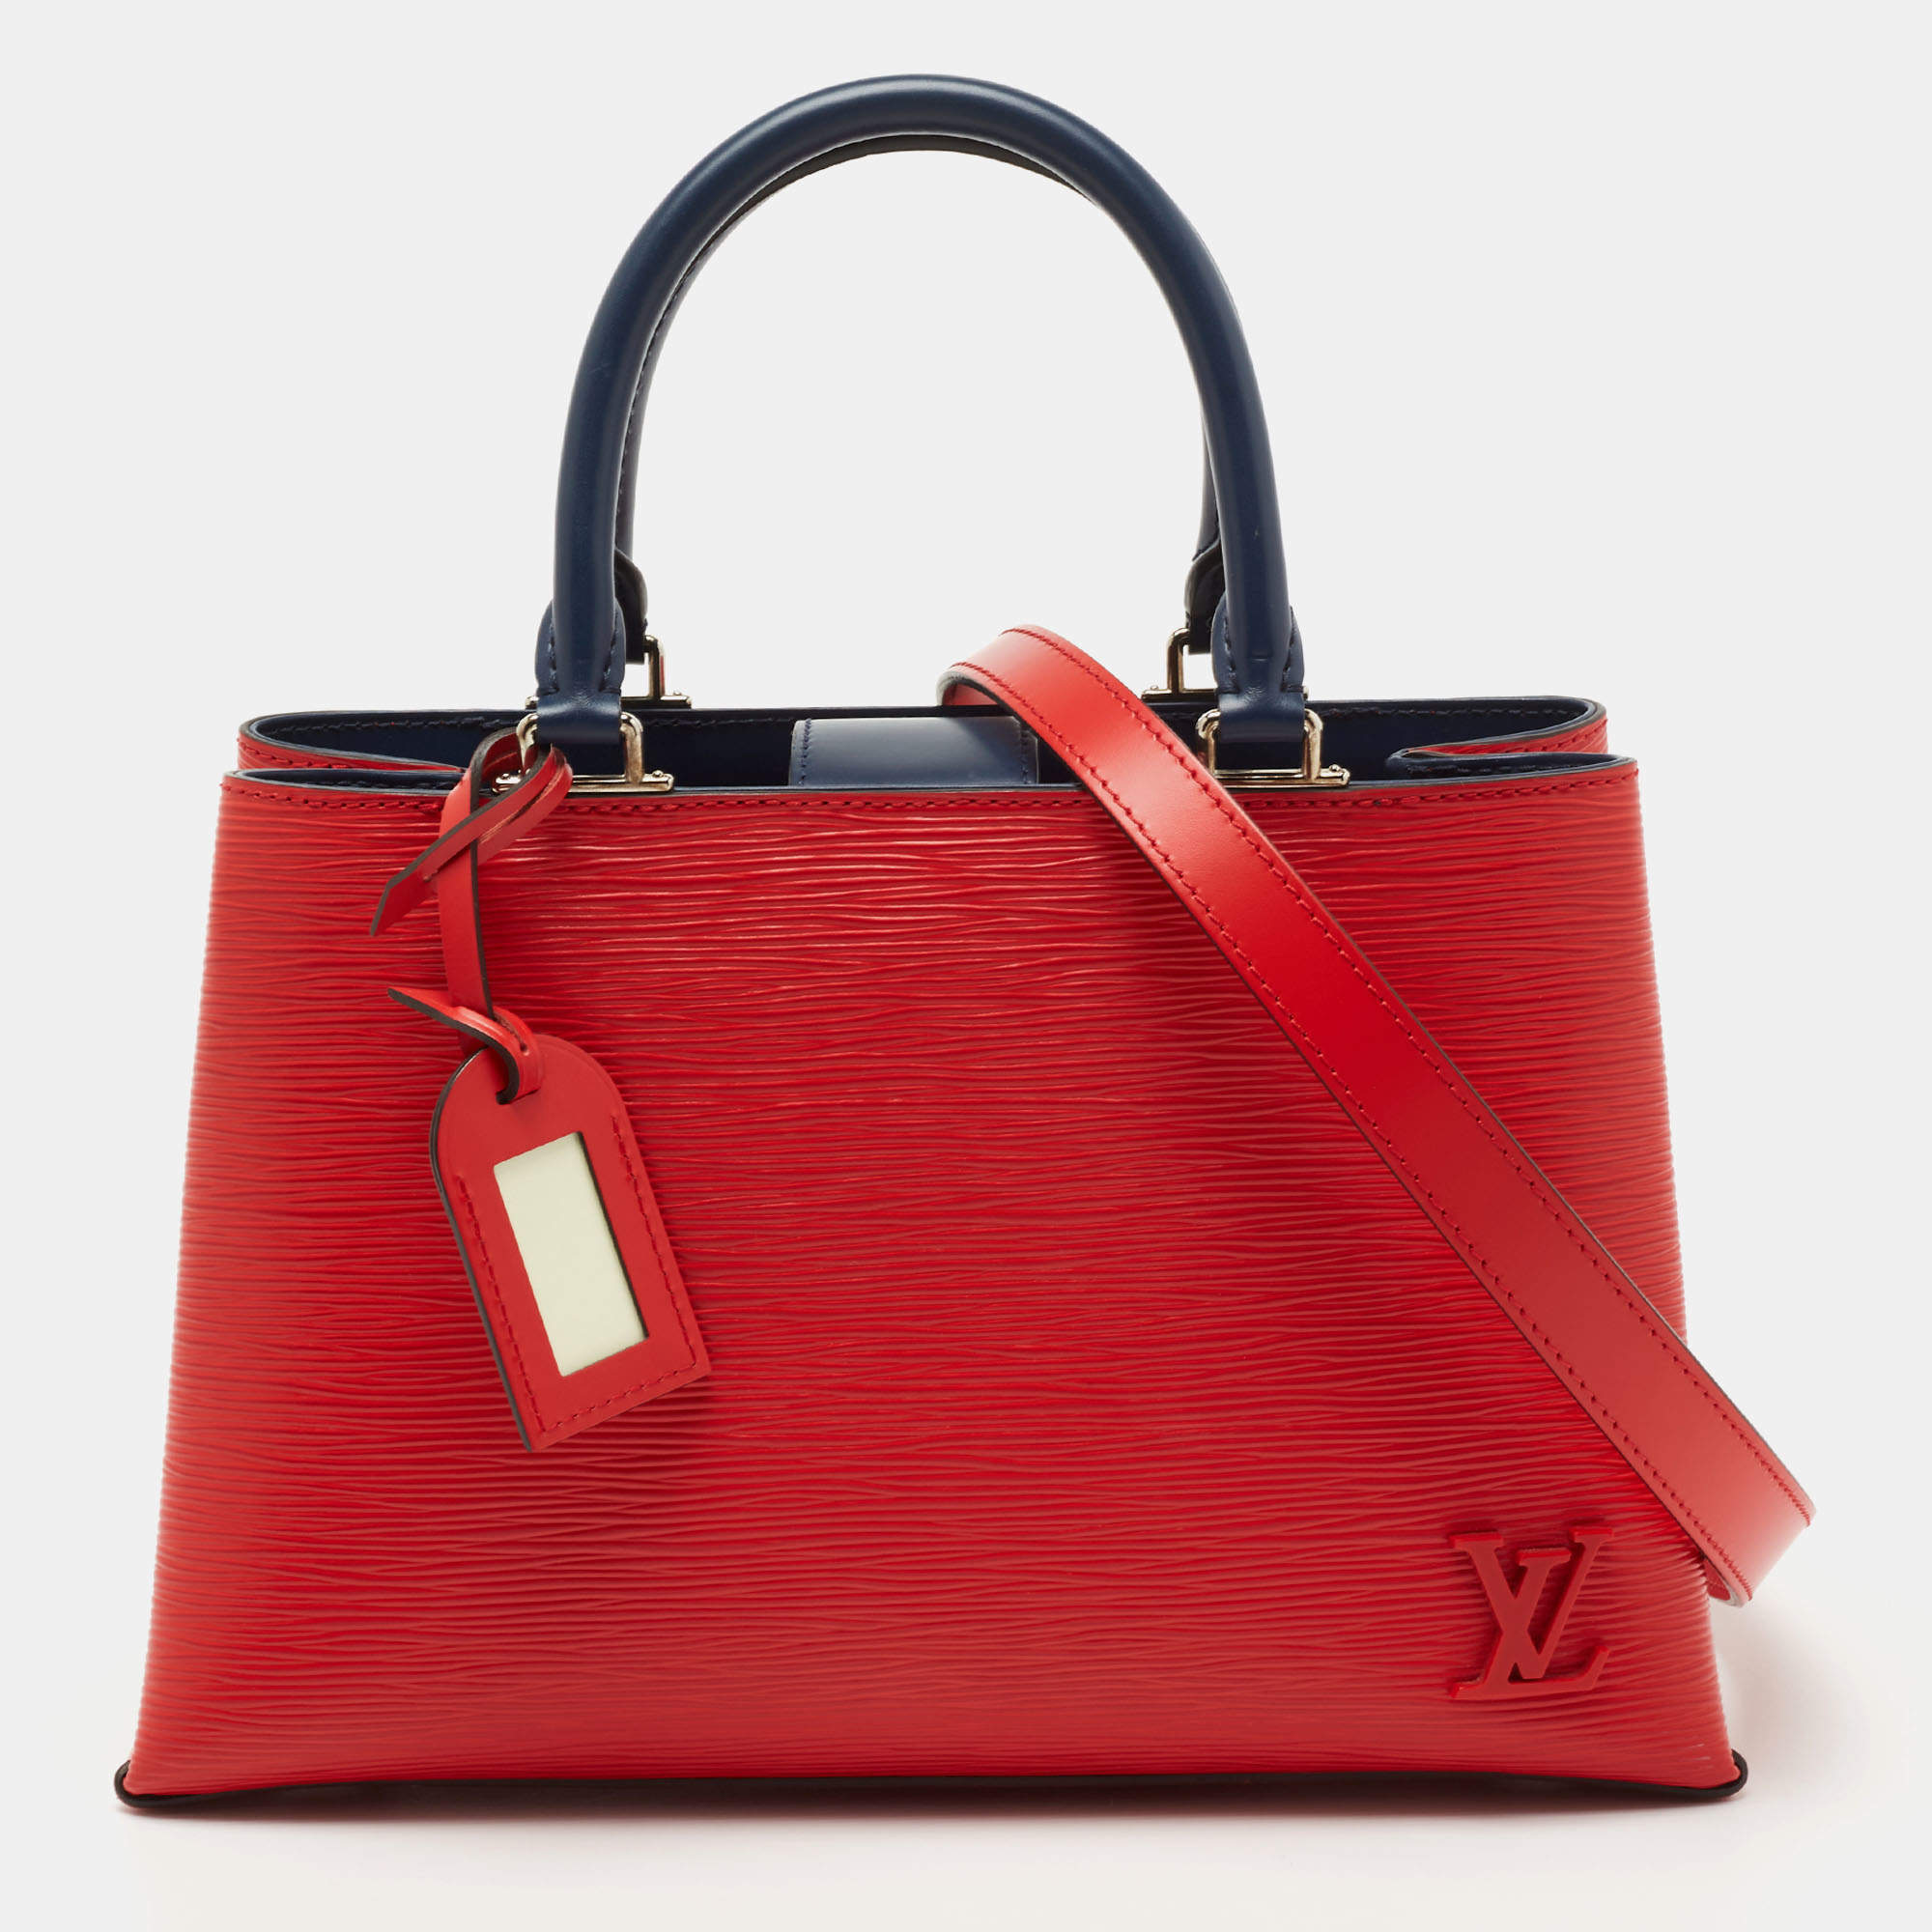 Garage Luxe - Louis Vuitton Red Epi Leather Kleber PM Bag with Long Strap  Excellent Condition with Box Price:1450$ + VAT(160$) #louisvuitton #fashion